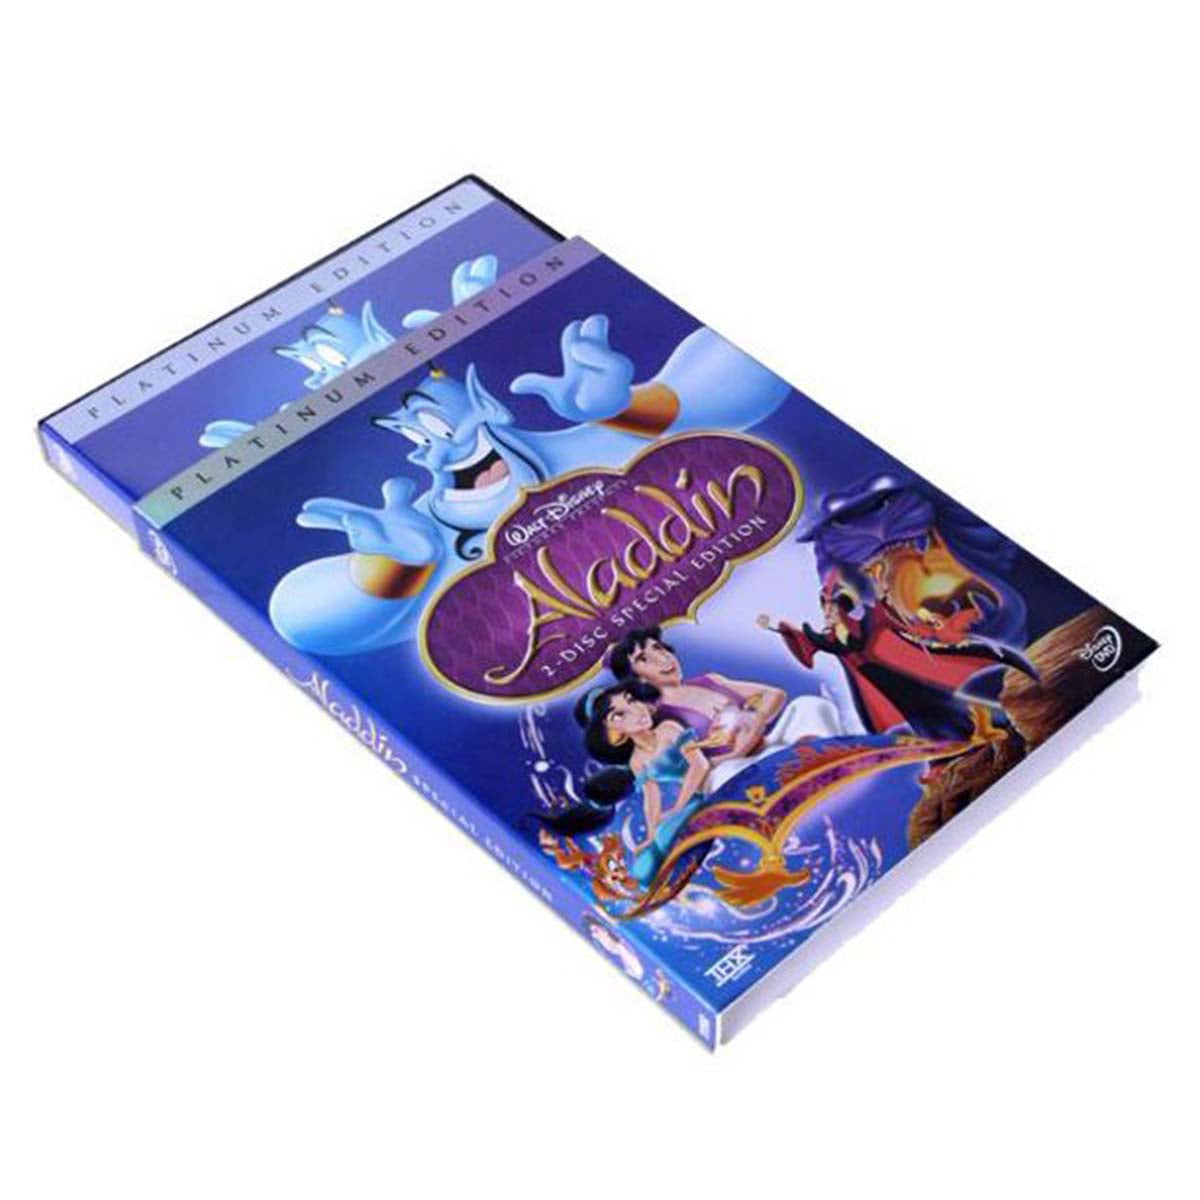 Aladdin Two-Disc Special Edition 